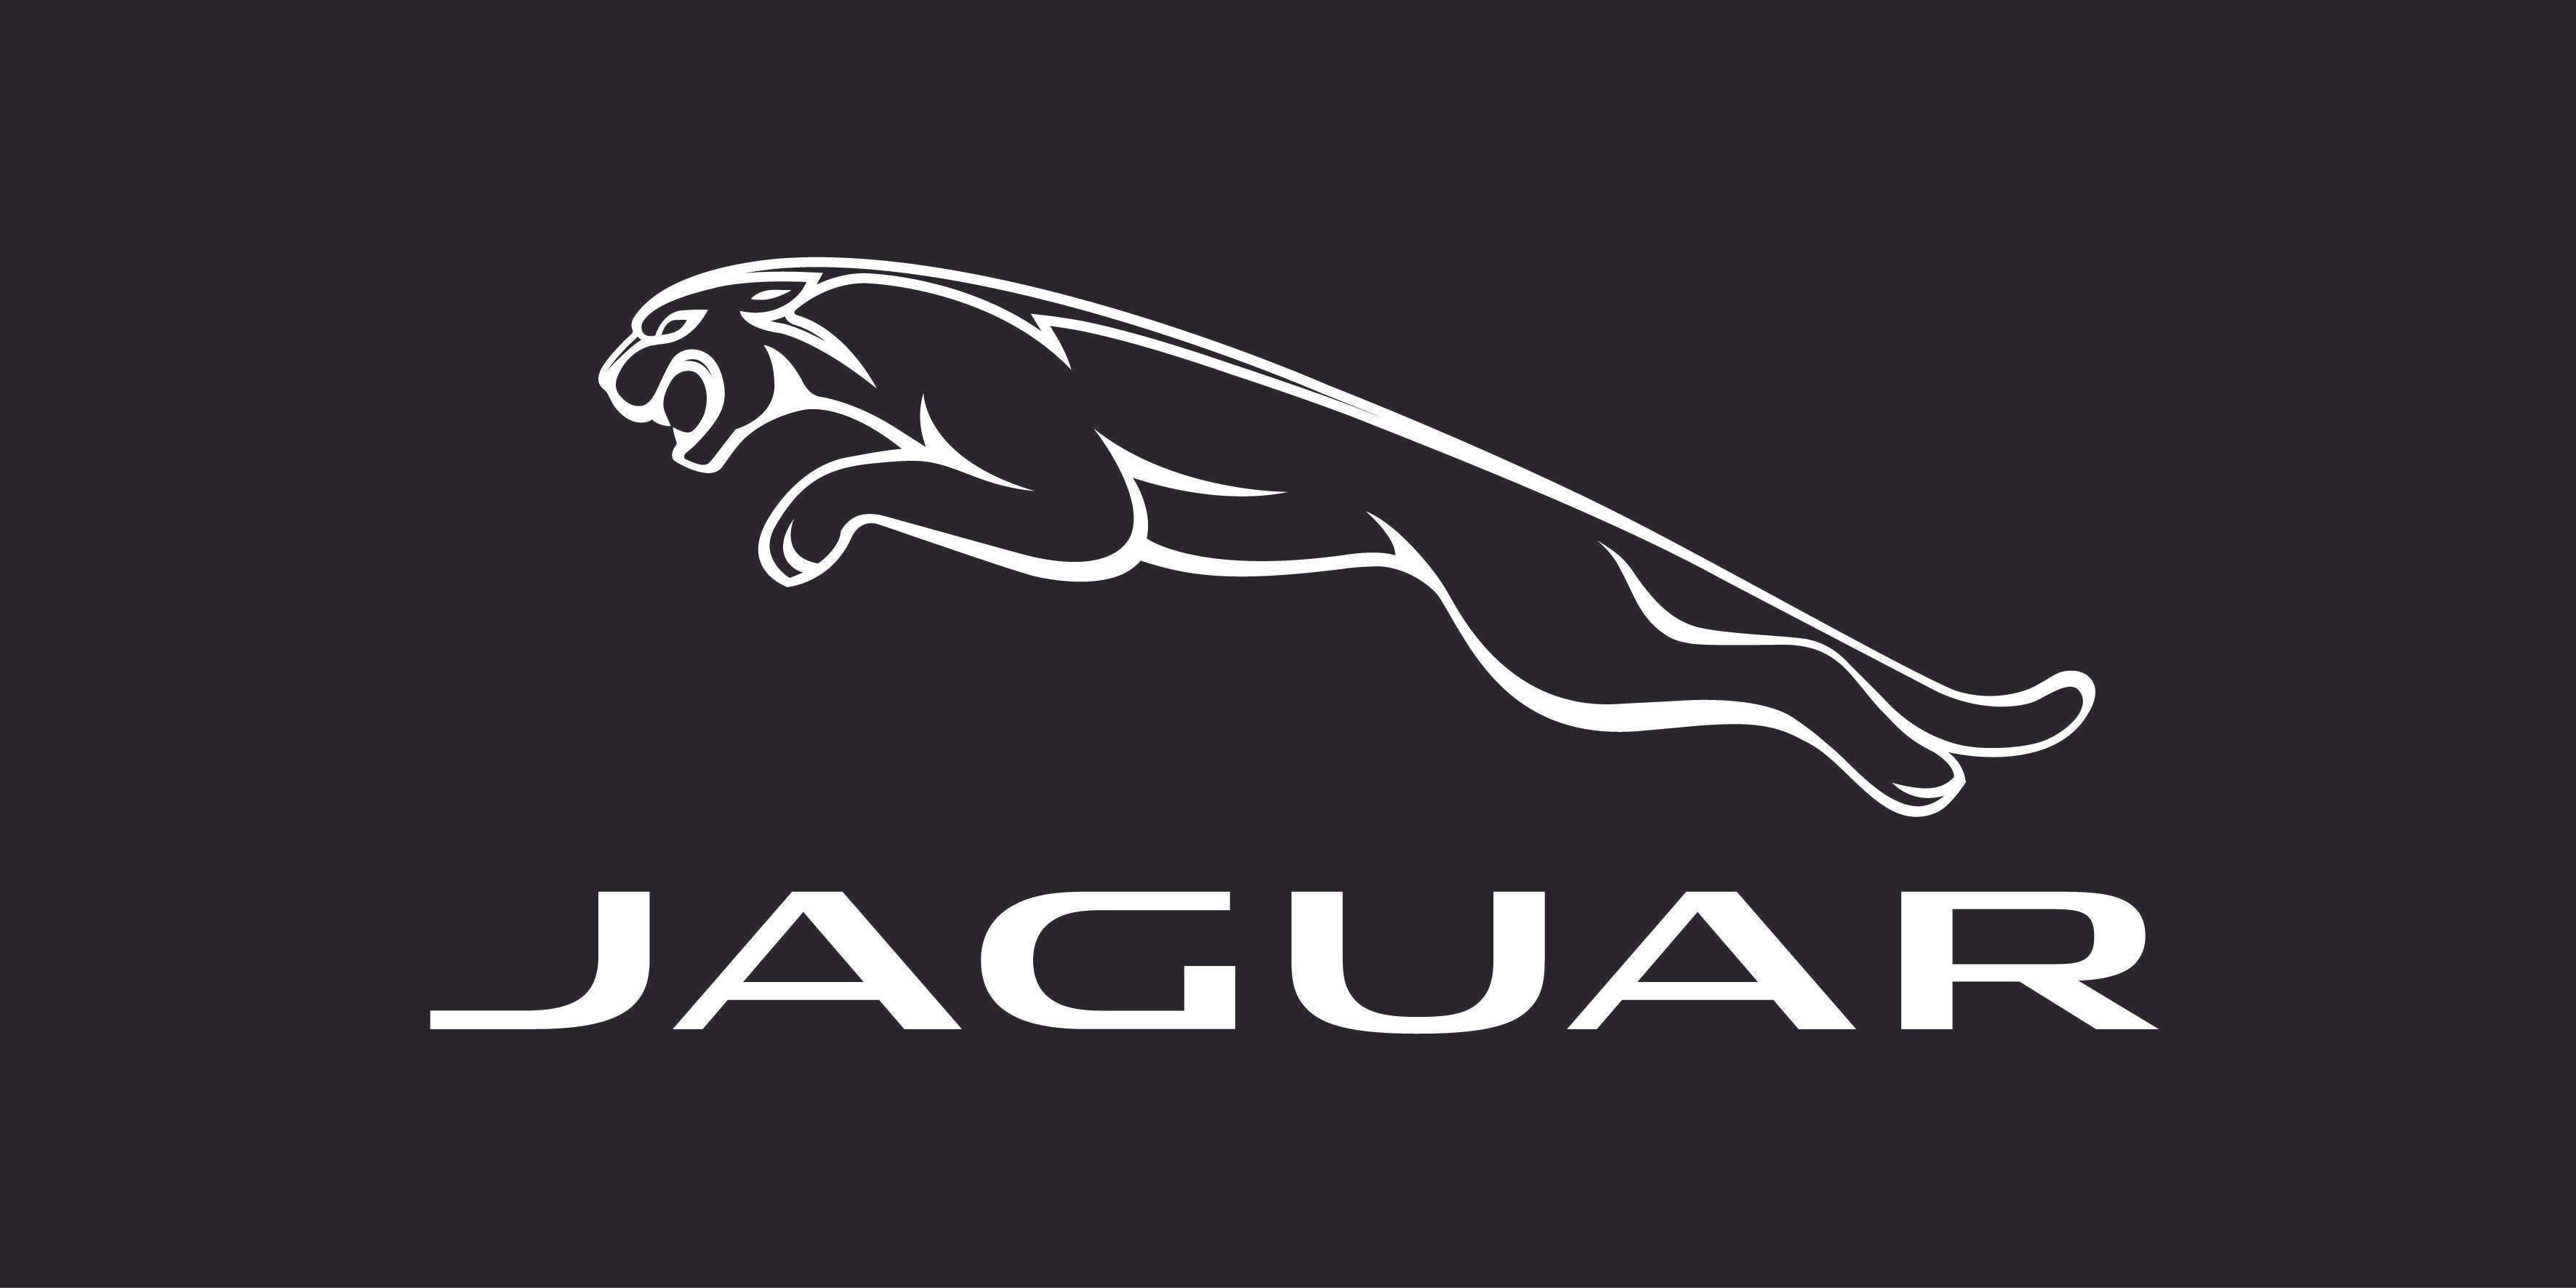 Best Jaguar Cars in India - Price, Mileage, Specifications, Images, Colors